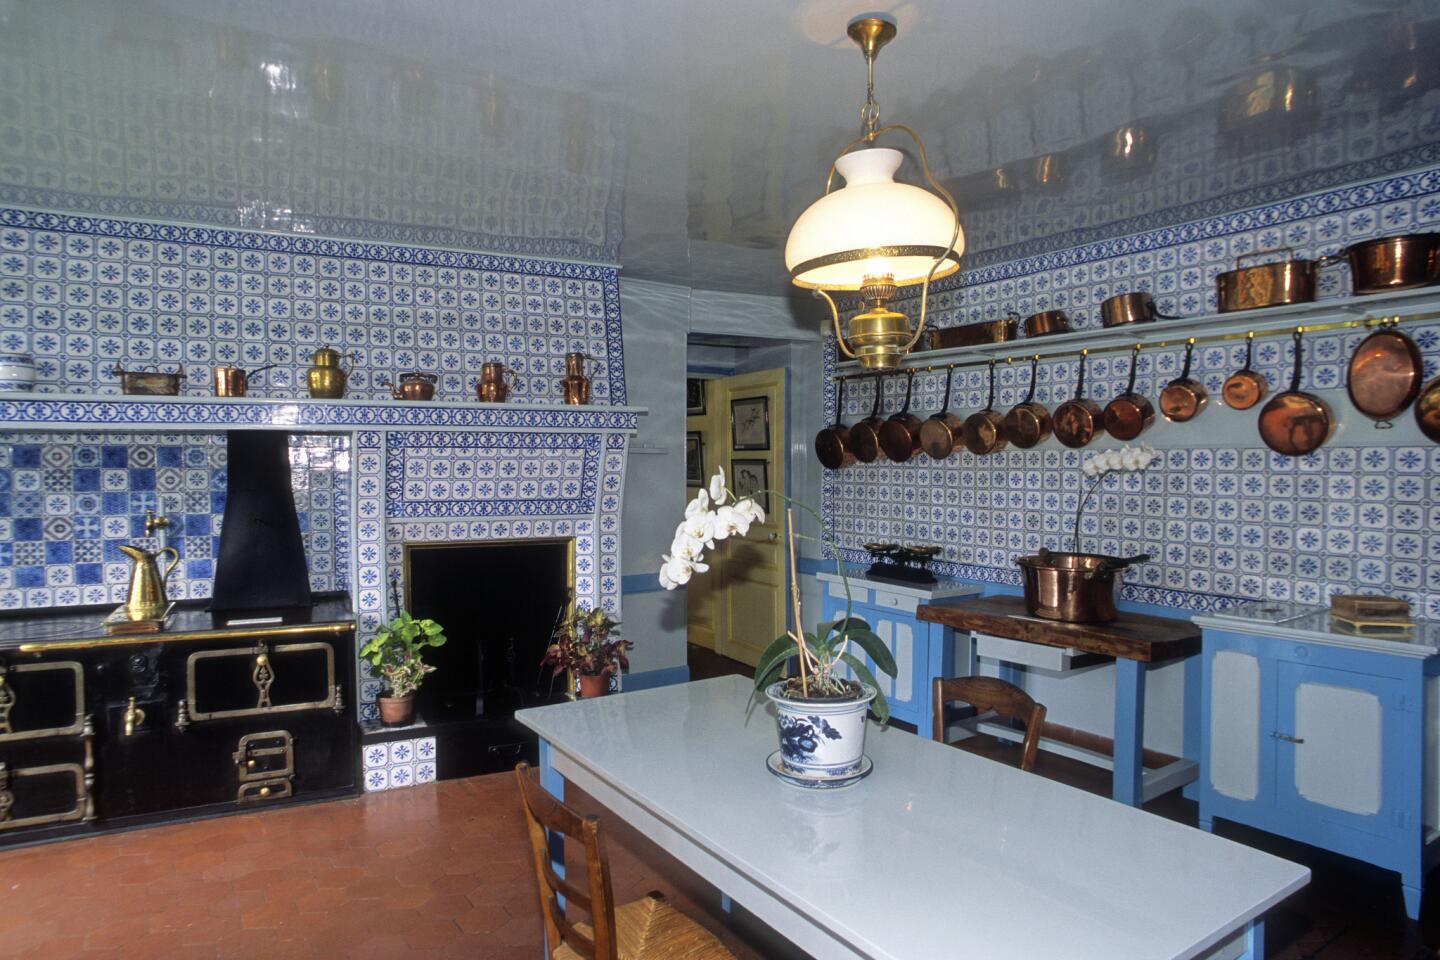 Claude Monet house, The kitchen in the Monet house in Giverny, France.